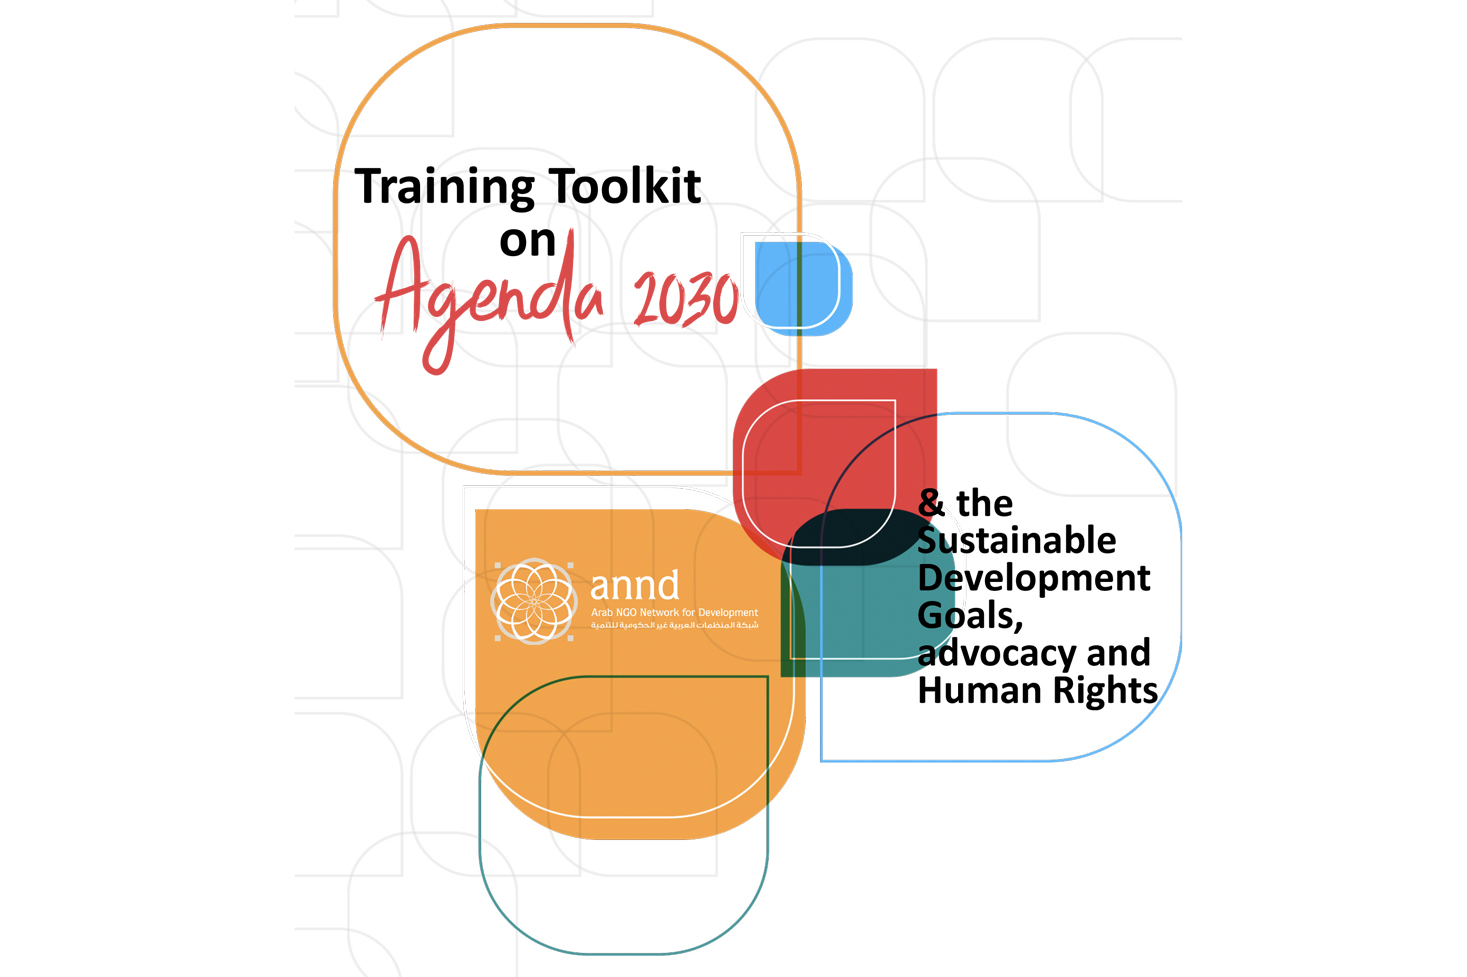 Training Toolkit on Agenda 2030 & the Sustainable Development Goals, advocacy and Human Rights.